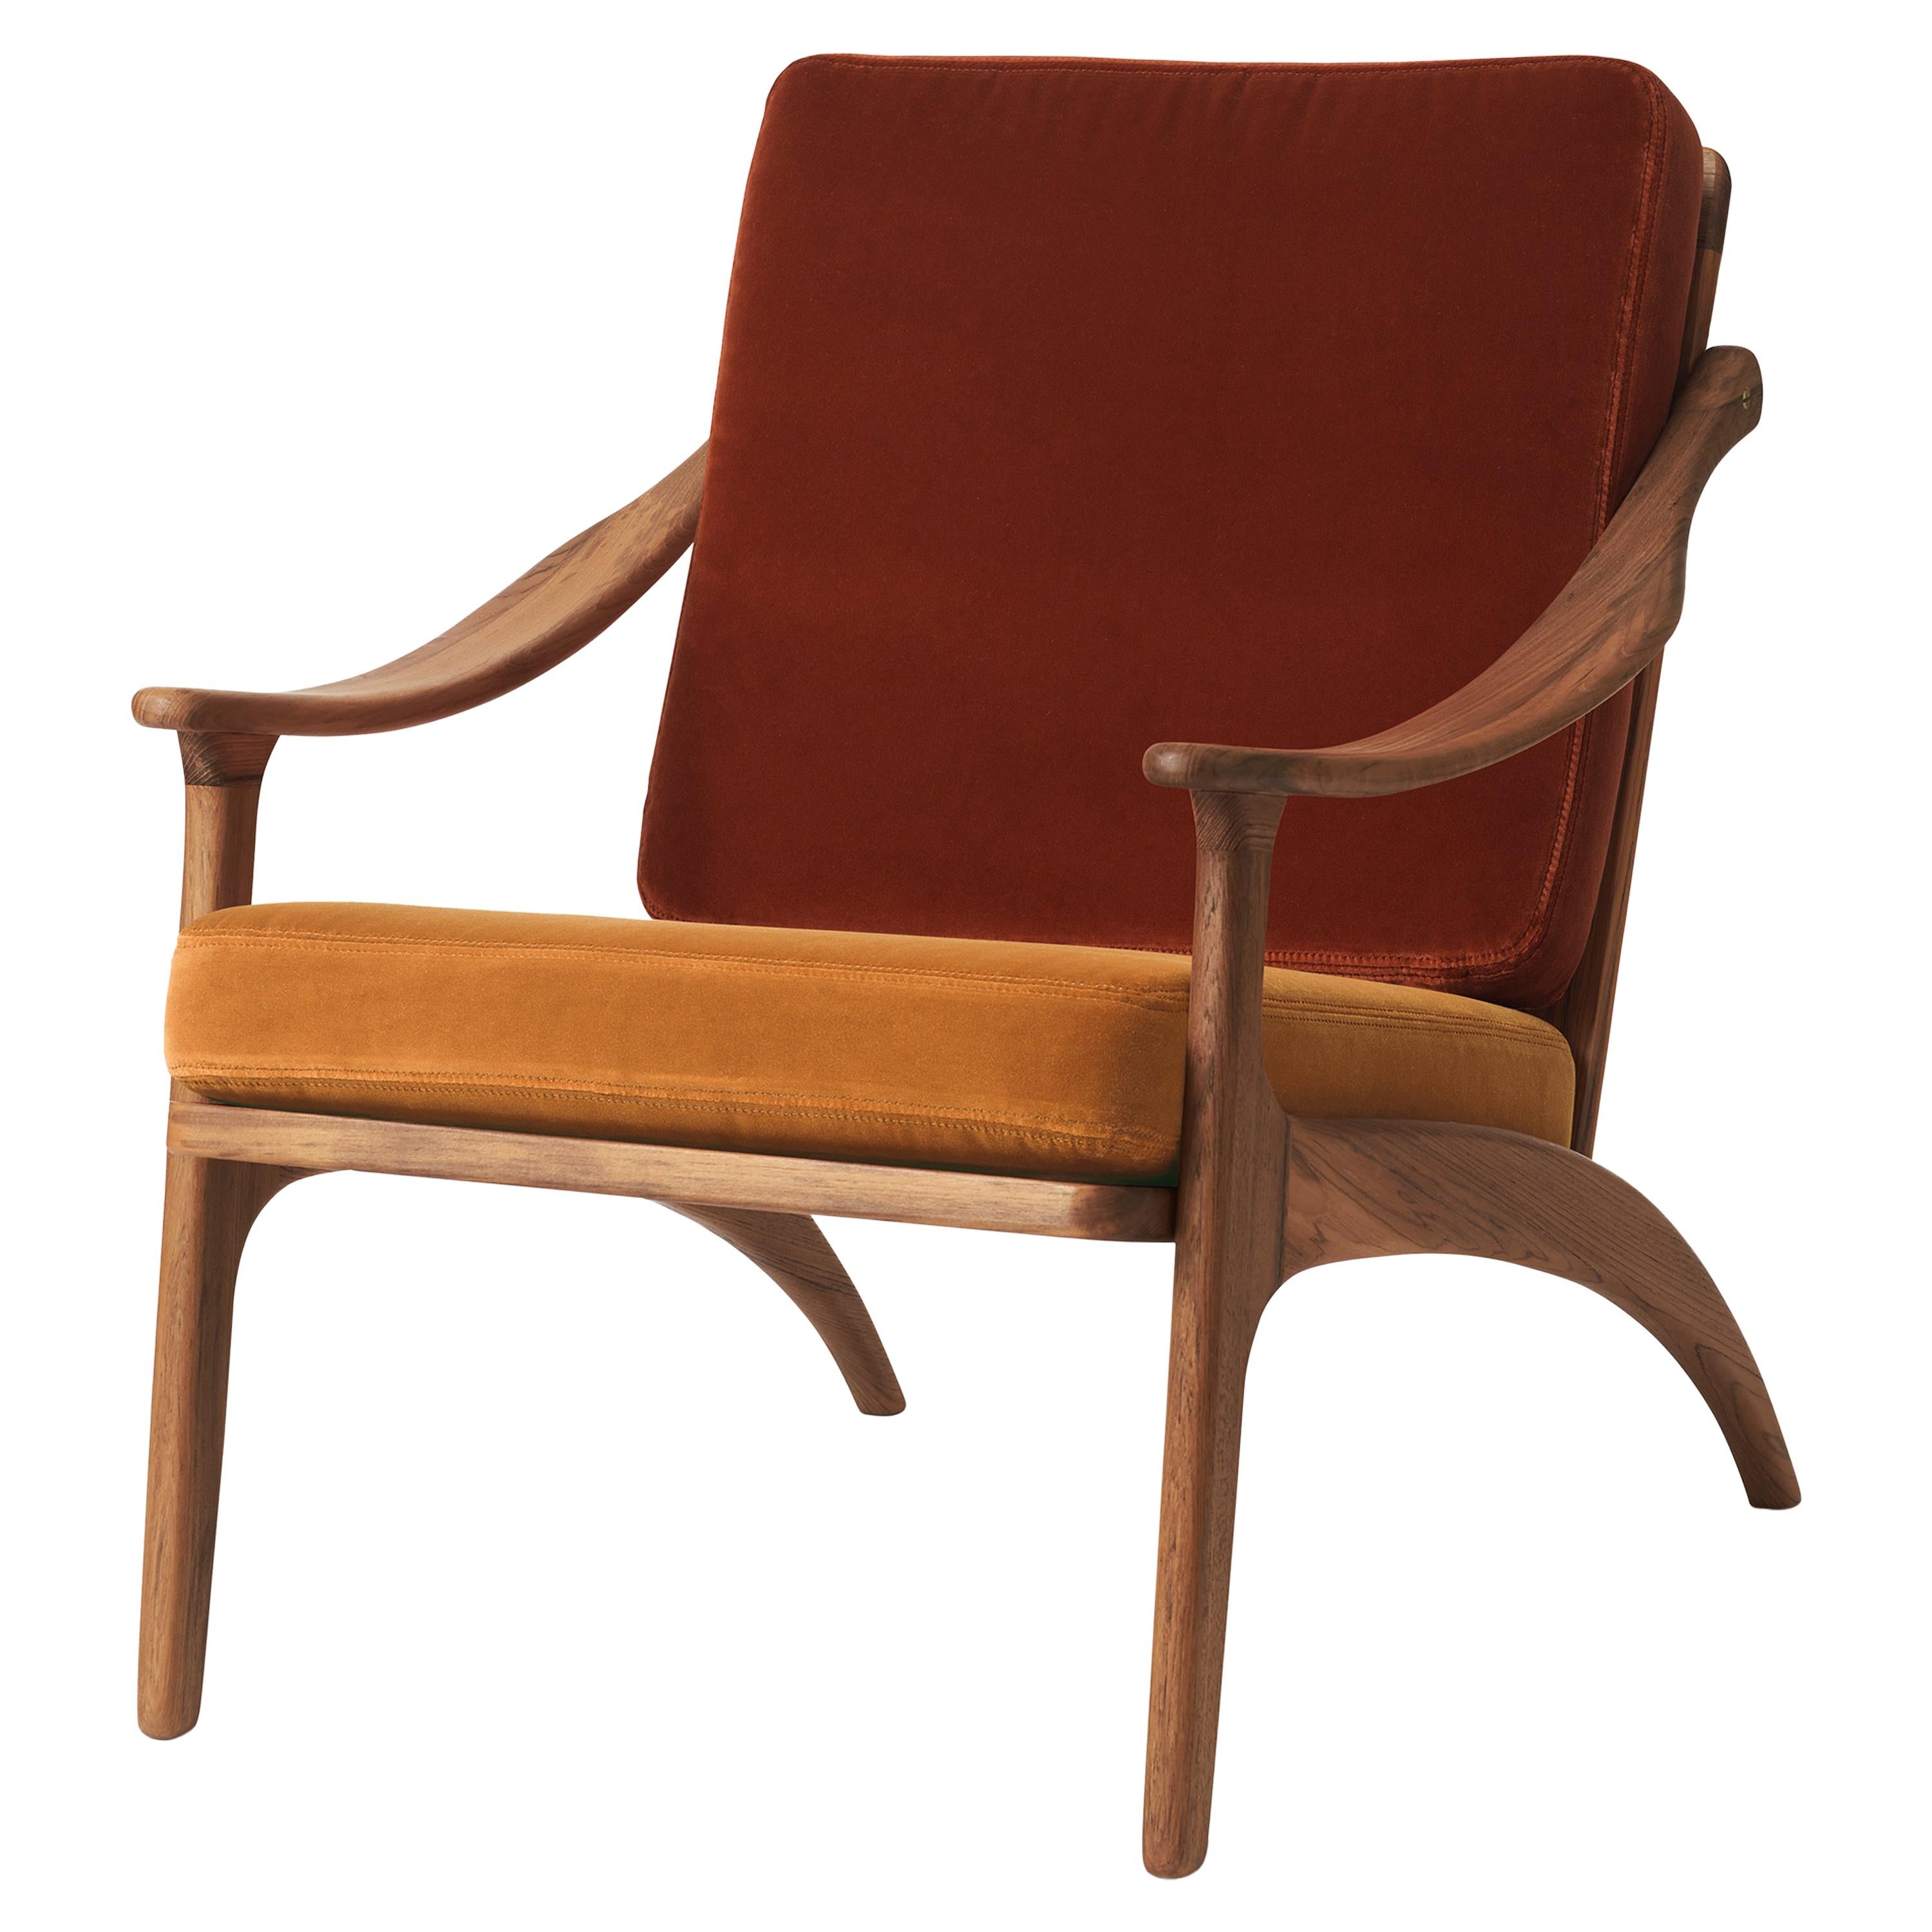 Lean Back Lounge Two-Tone Chair in Teak, by Arne Hovmand-Olsen from Warm Nordic